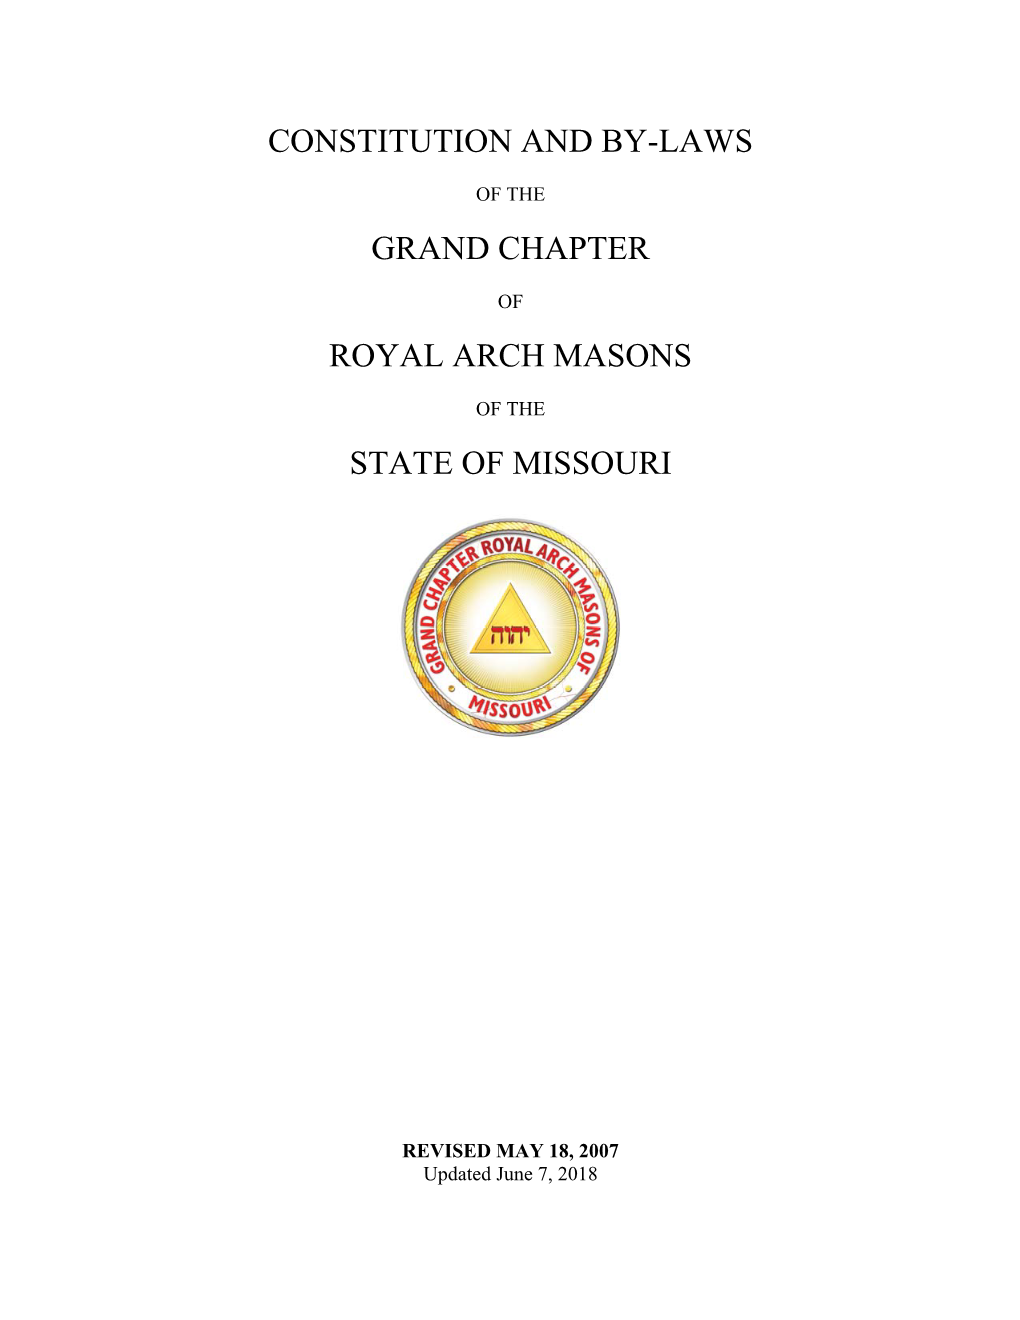 Constitution and By-Laws Grand Chapter Royal Arch